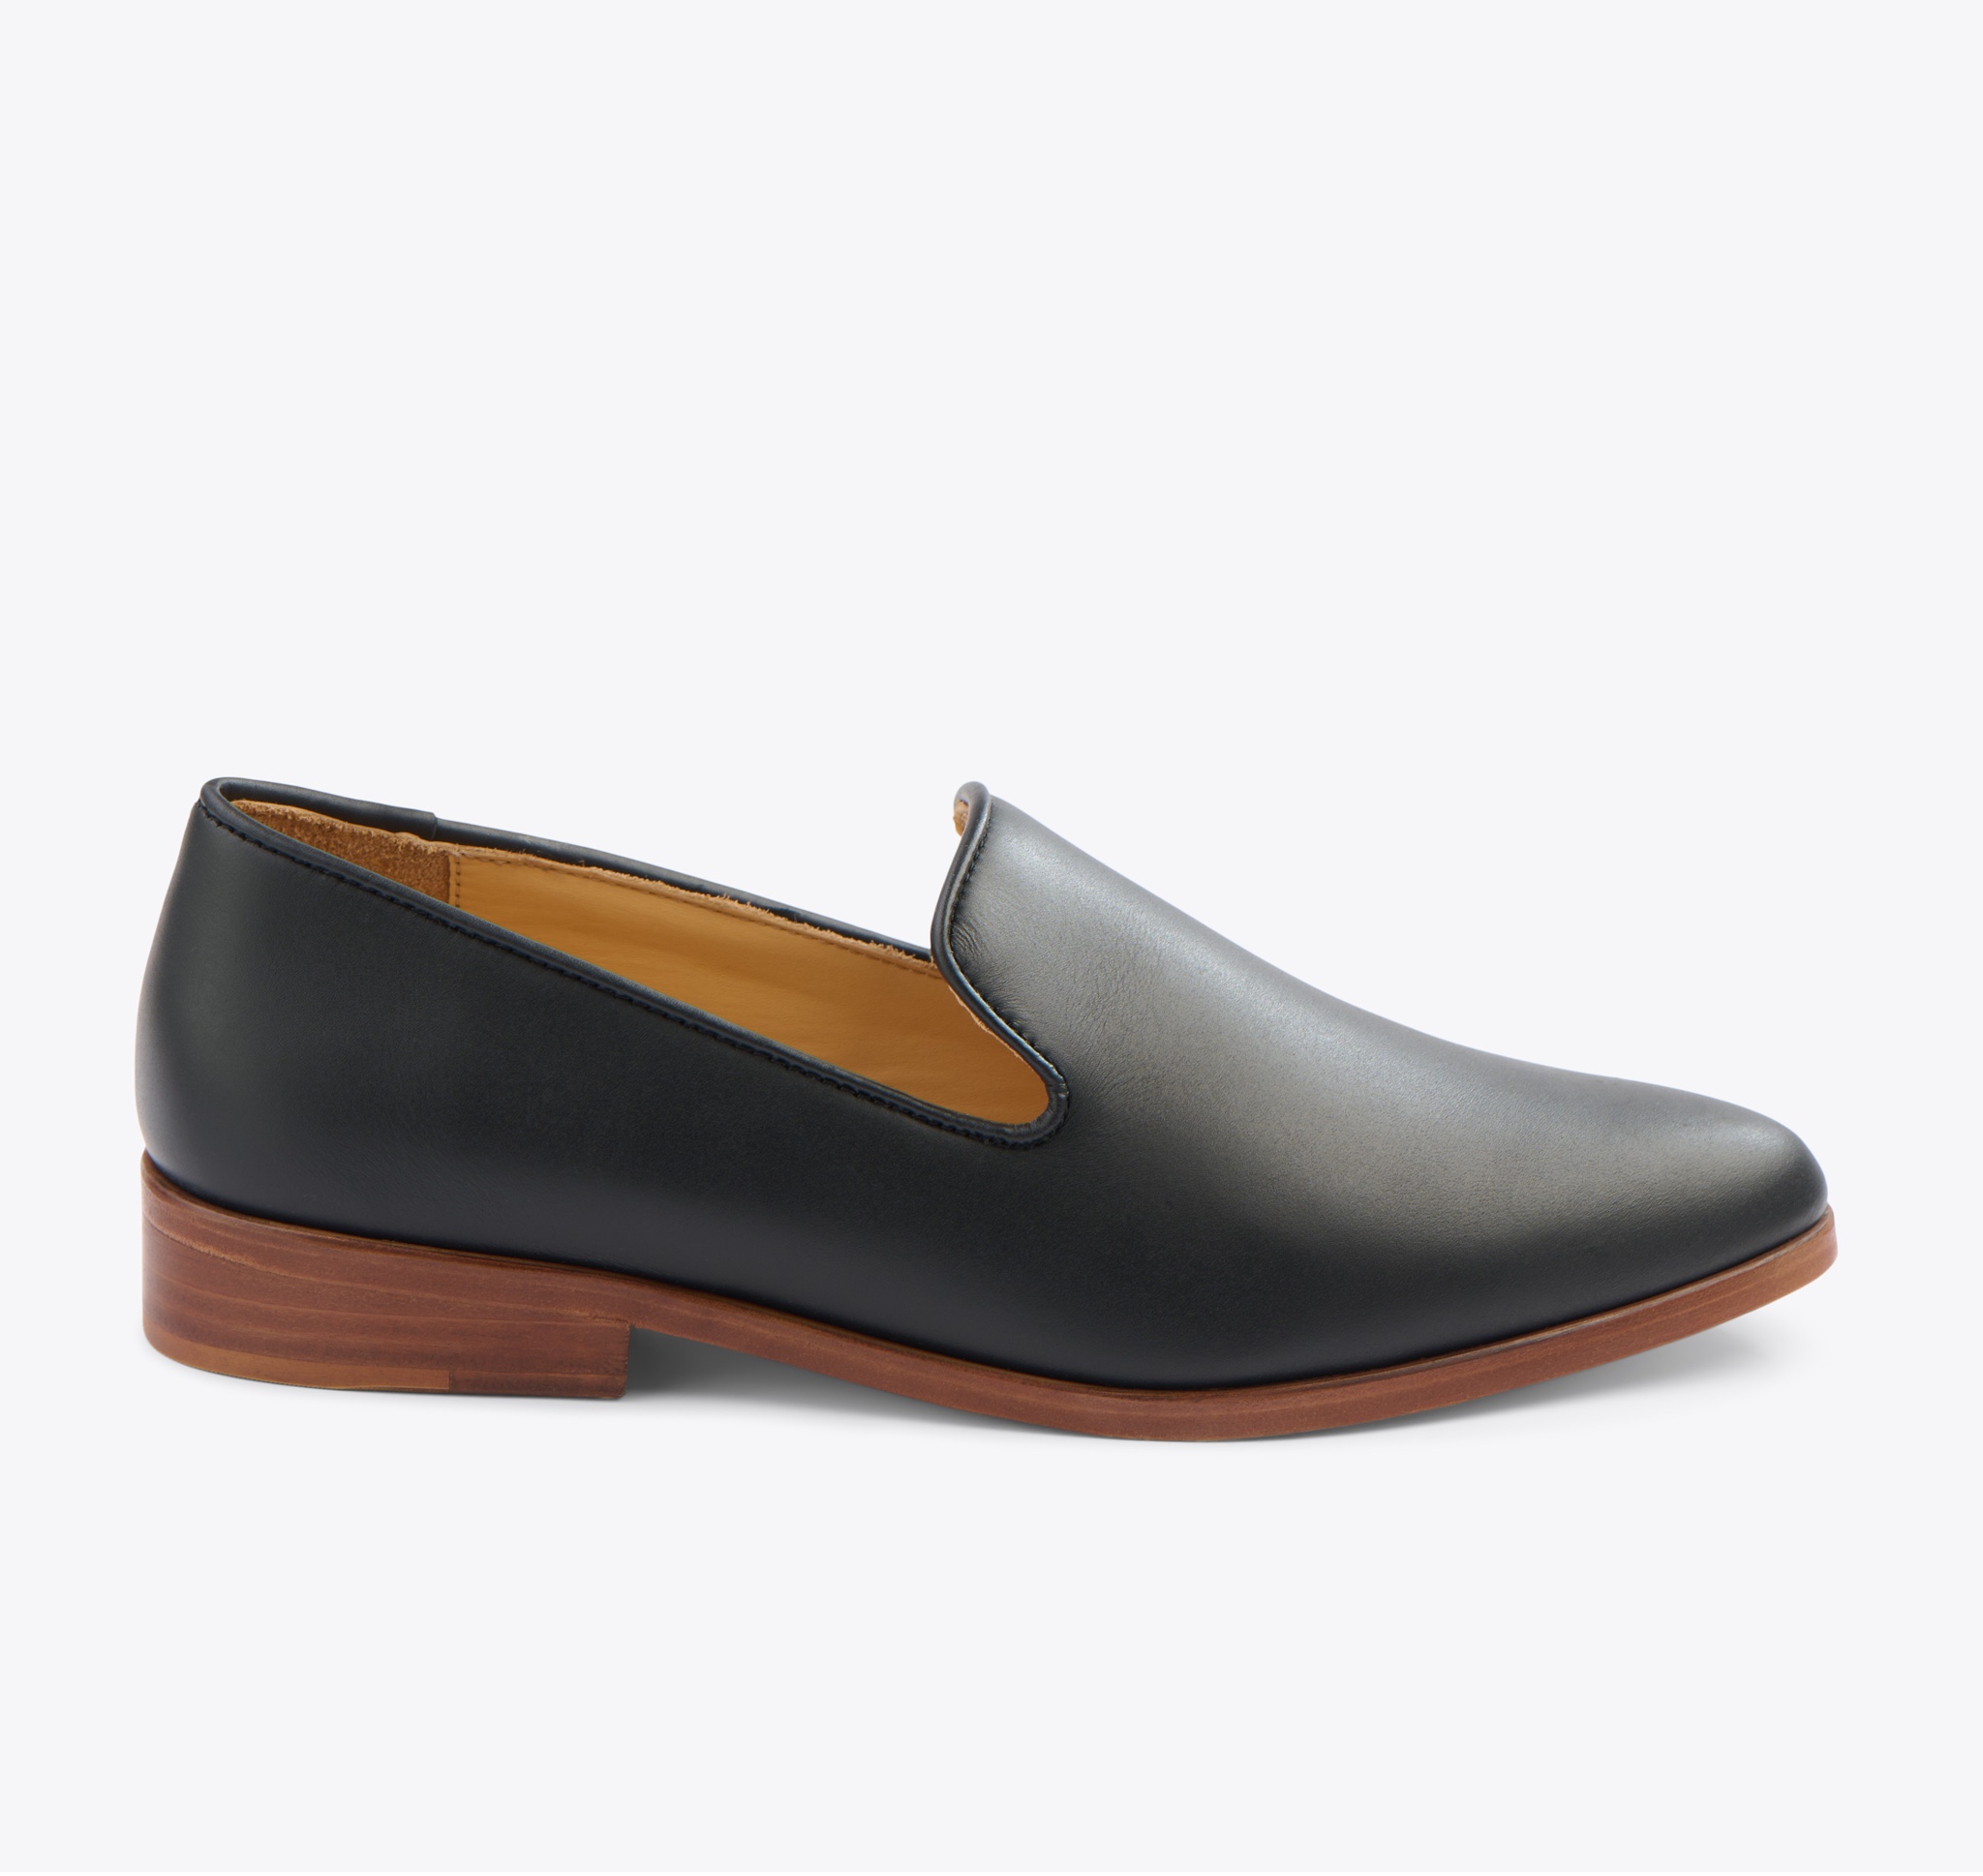 Nisolo Everyday Slip On Loafer Black - Every Nisolo product is built on the foundation of comfort, function, and design. 